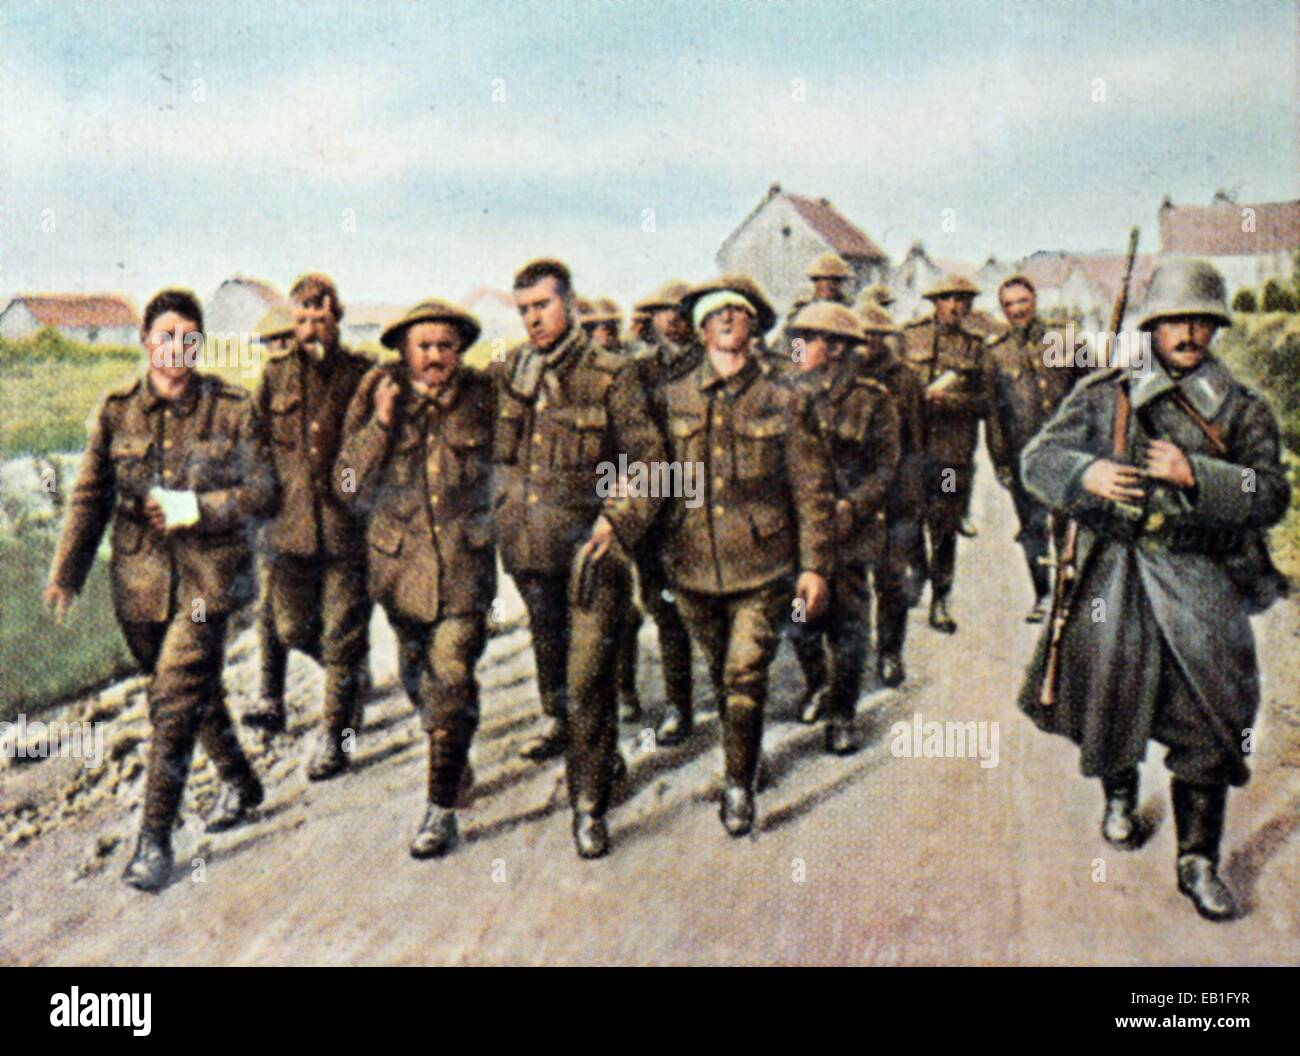 The contemporary colorized German propaganda photo shows wounded English soldiers after they were taking prisoner by the German troops during the Battle of the Somme in 1916. Photo: Neumann Archive - NO WIRE SERVICE Stock Photo